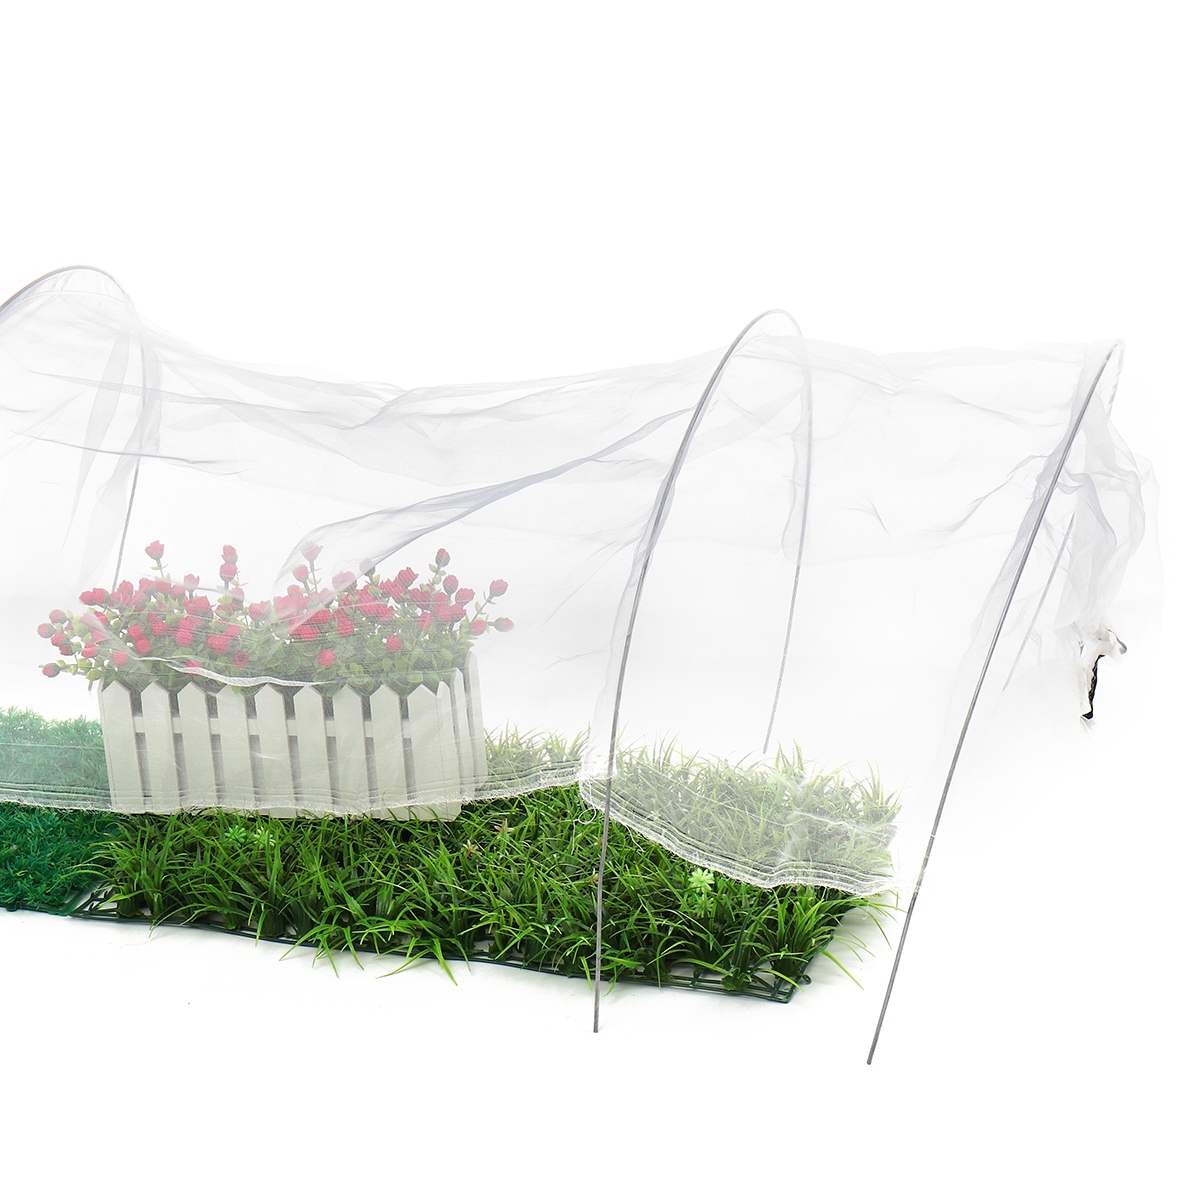 Plant-Net-Shade-Insect-Bird-Barrier-Netting-Garden-Greenhouse-Cover-Protect-Mesh-1606544-9